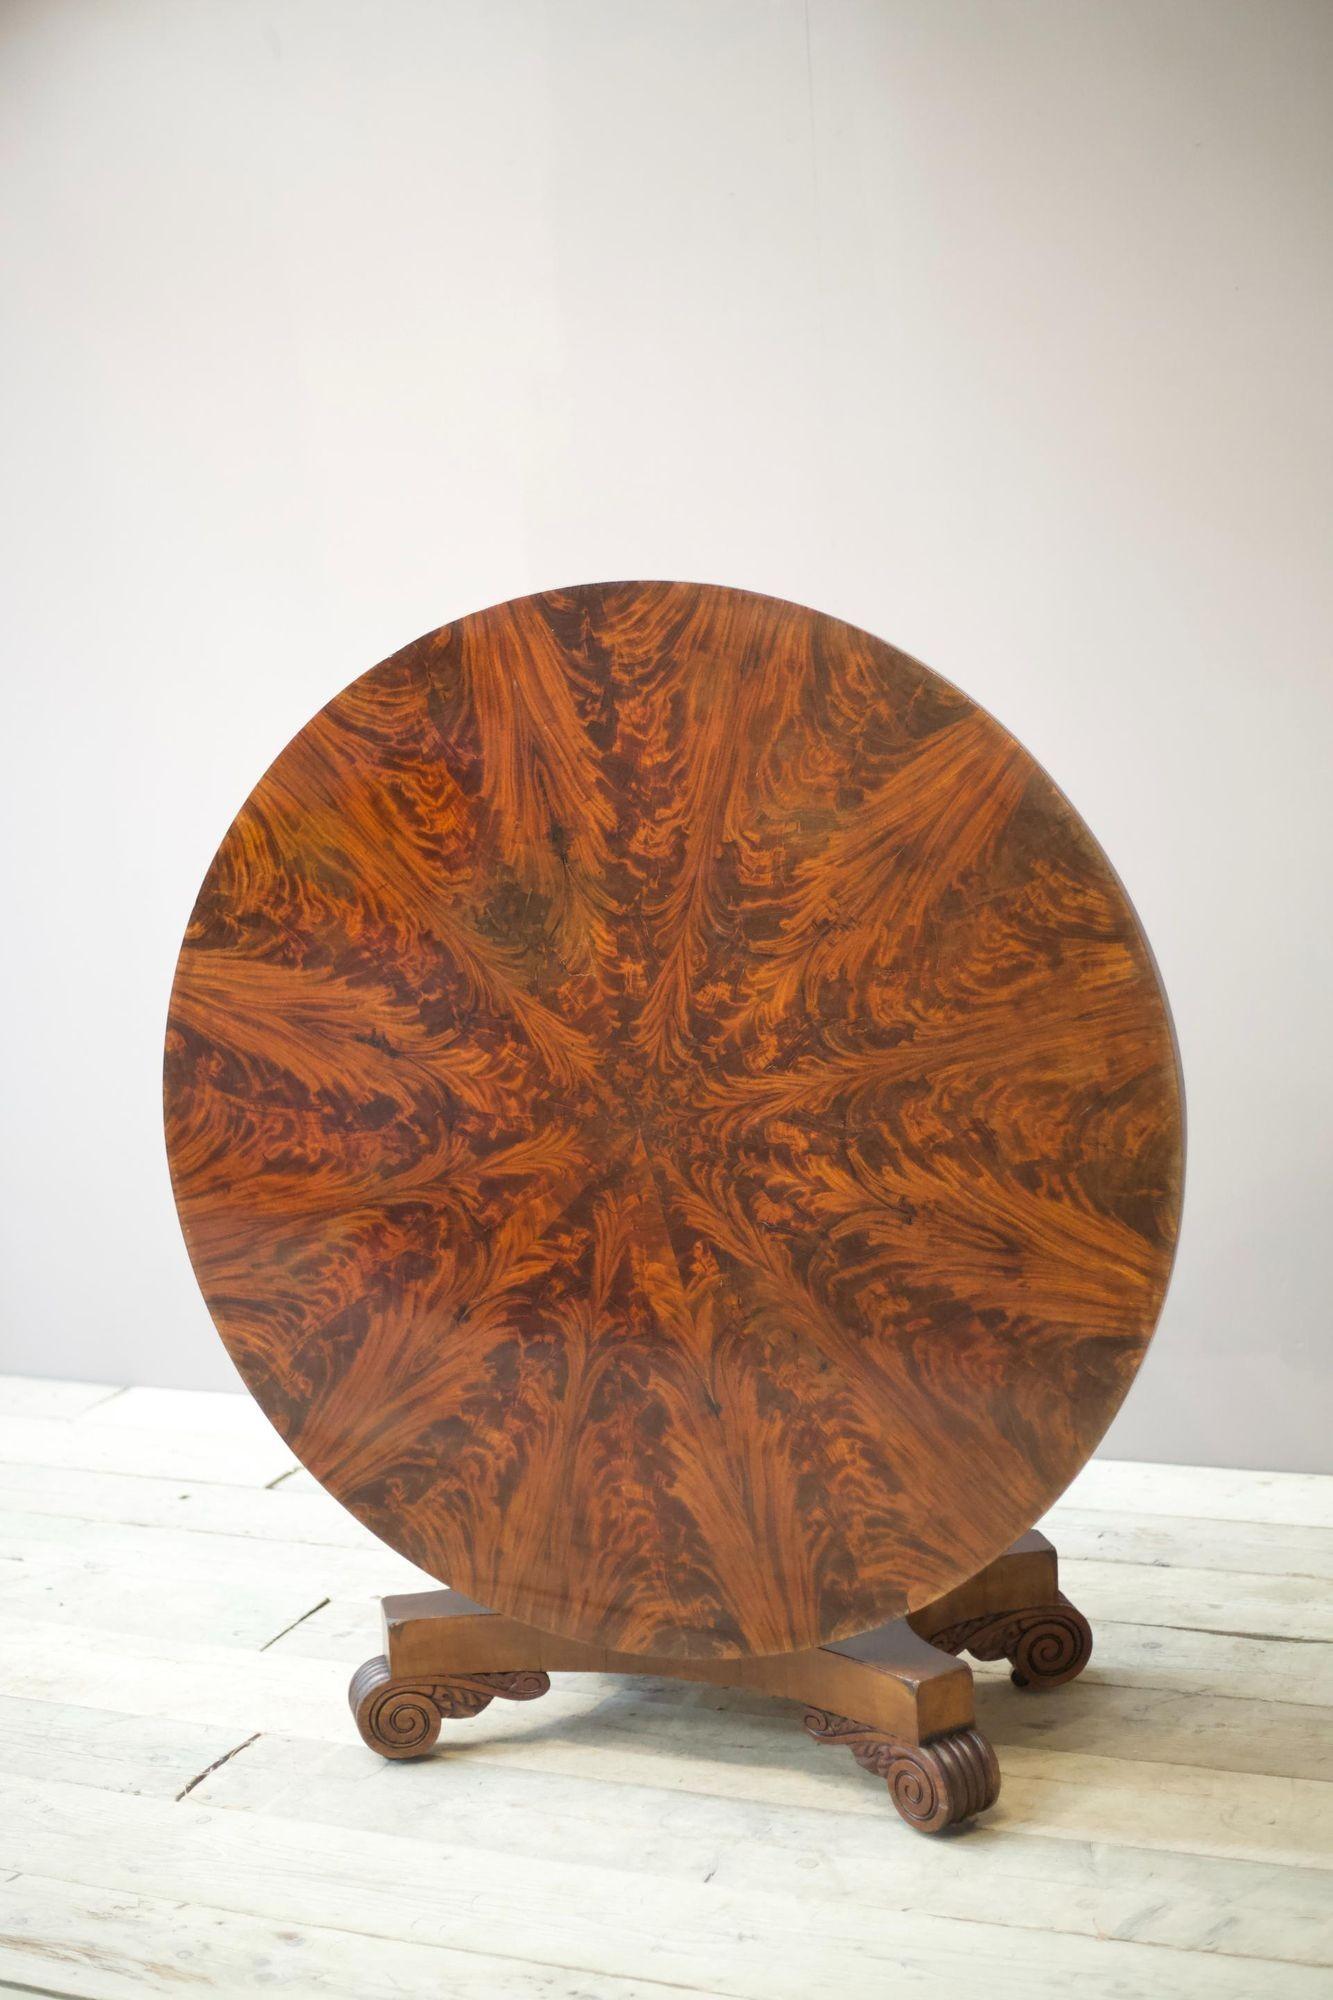 This is a striking early 19th century William IV flame mahogany centre table. The top of the table is stunning, the way the veneer has been placed really shows the quality of the work and care taken to make such an impactful finish. What I like